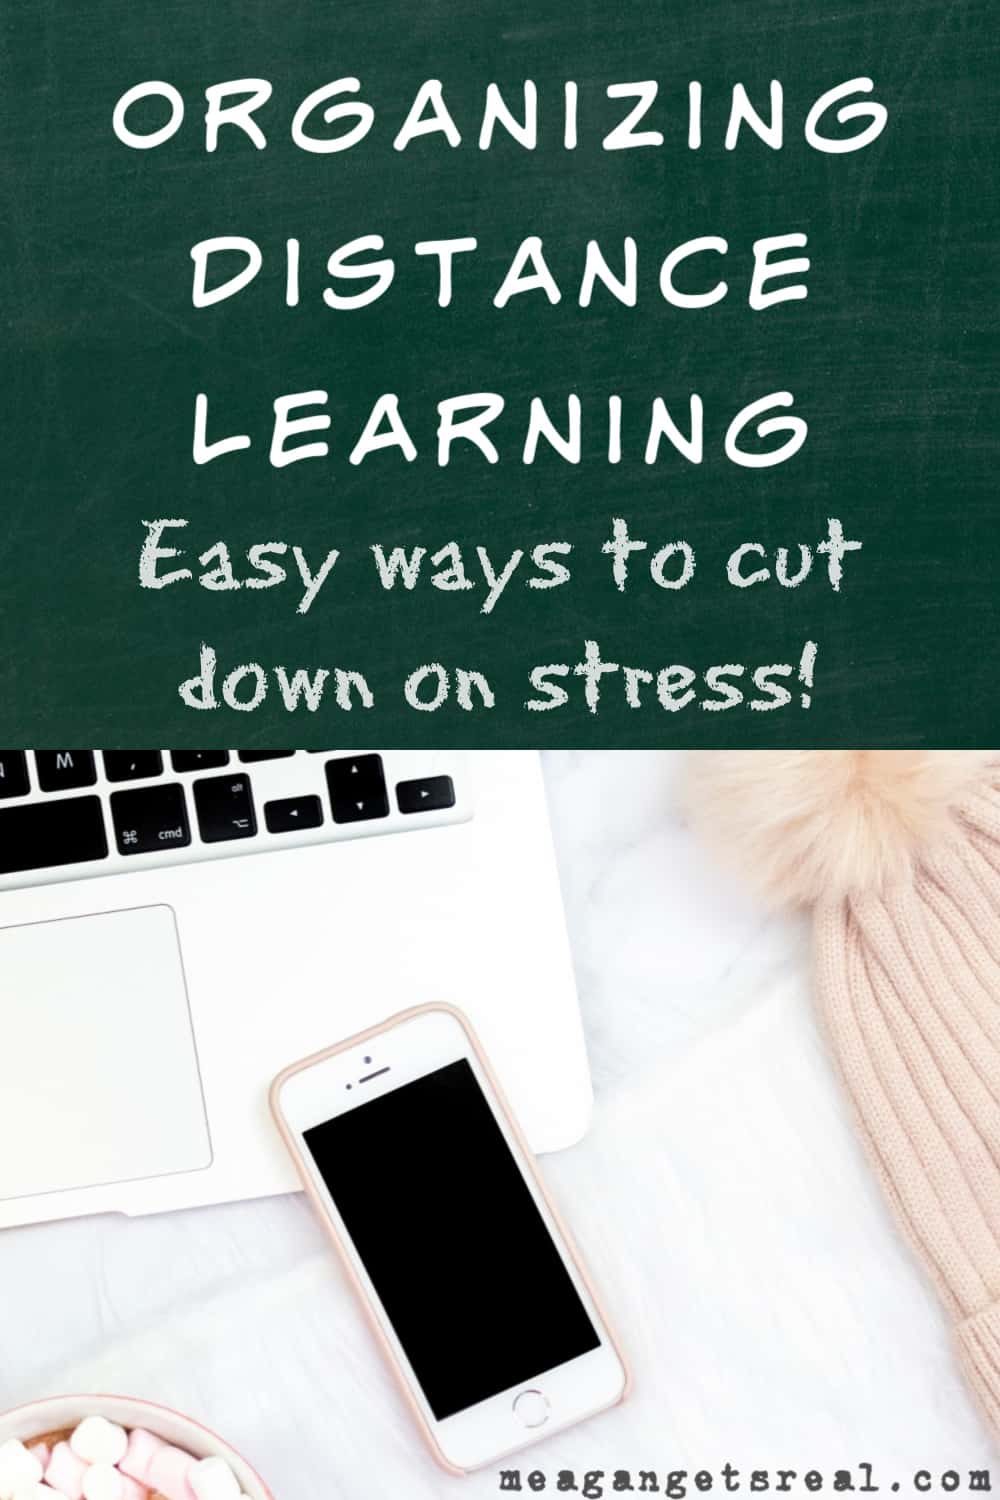 Are you struggling with organizing distance learning? Don't do it alone! I have a really easy way to help you organize and regain your peace! 